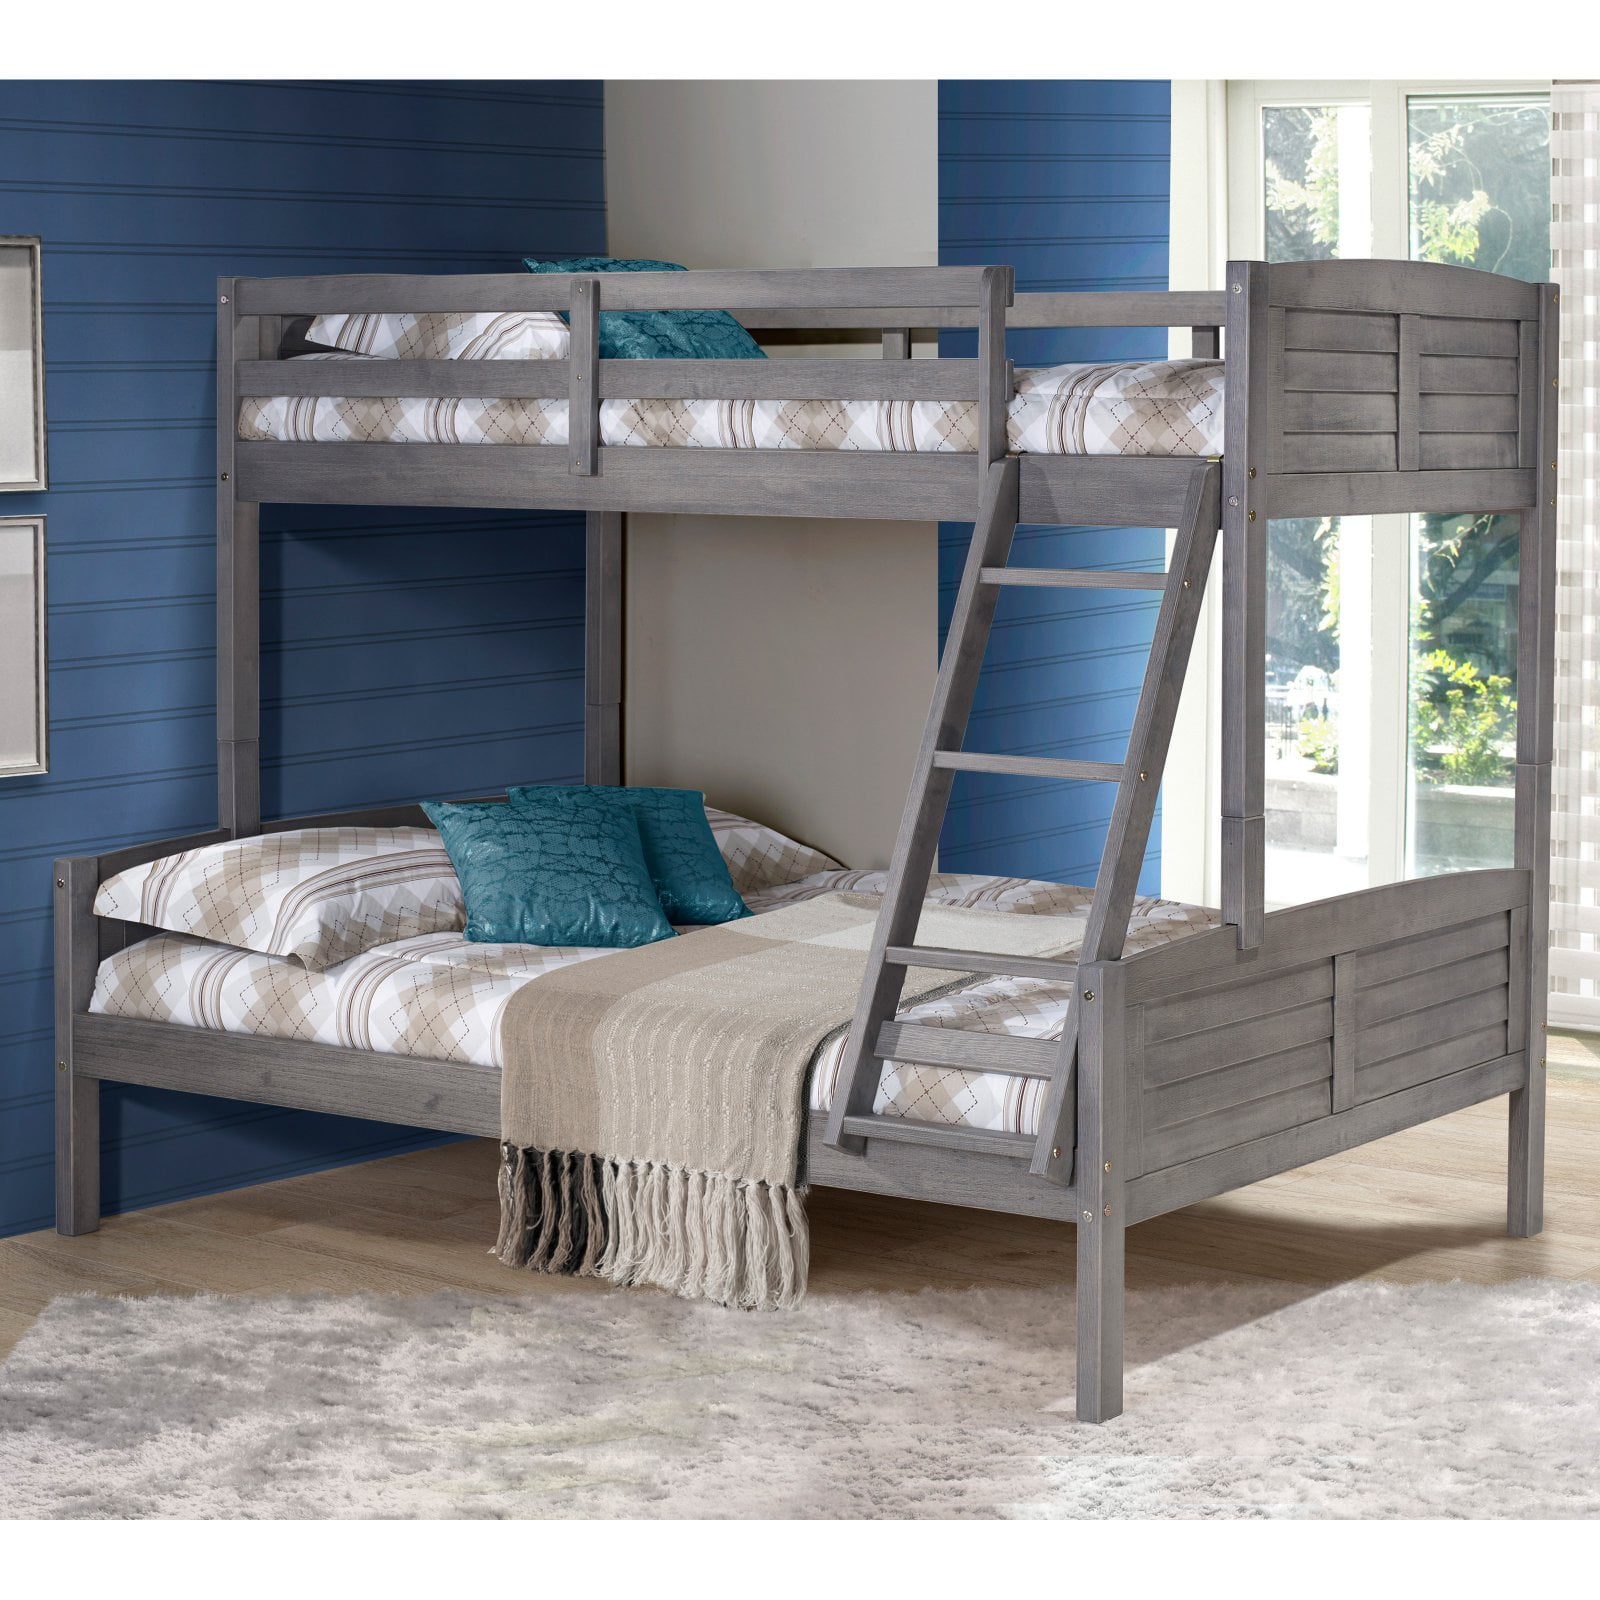 Donco Kids Louver Wood Bunk Bed Twin, Donco Bunk Bed